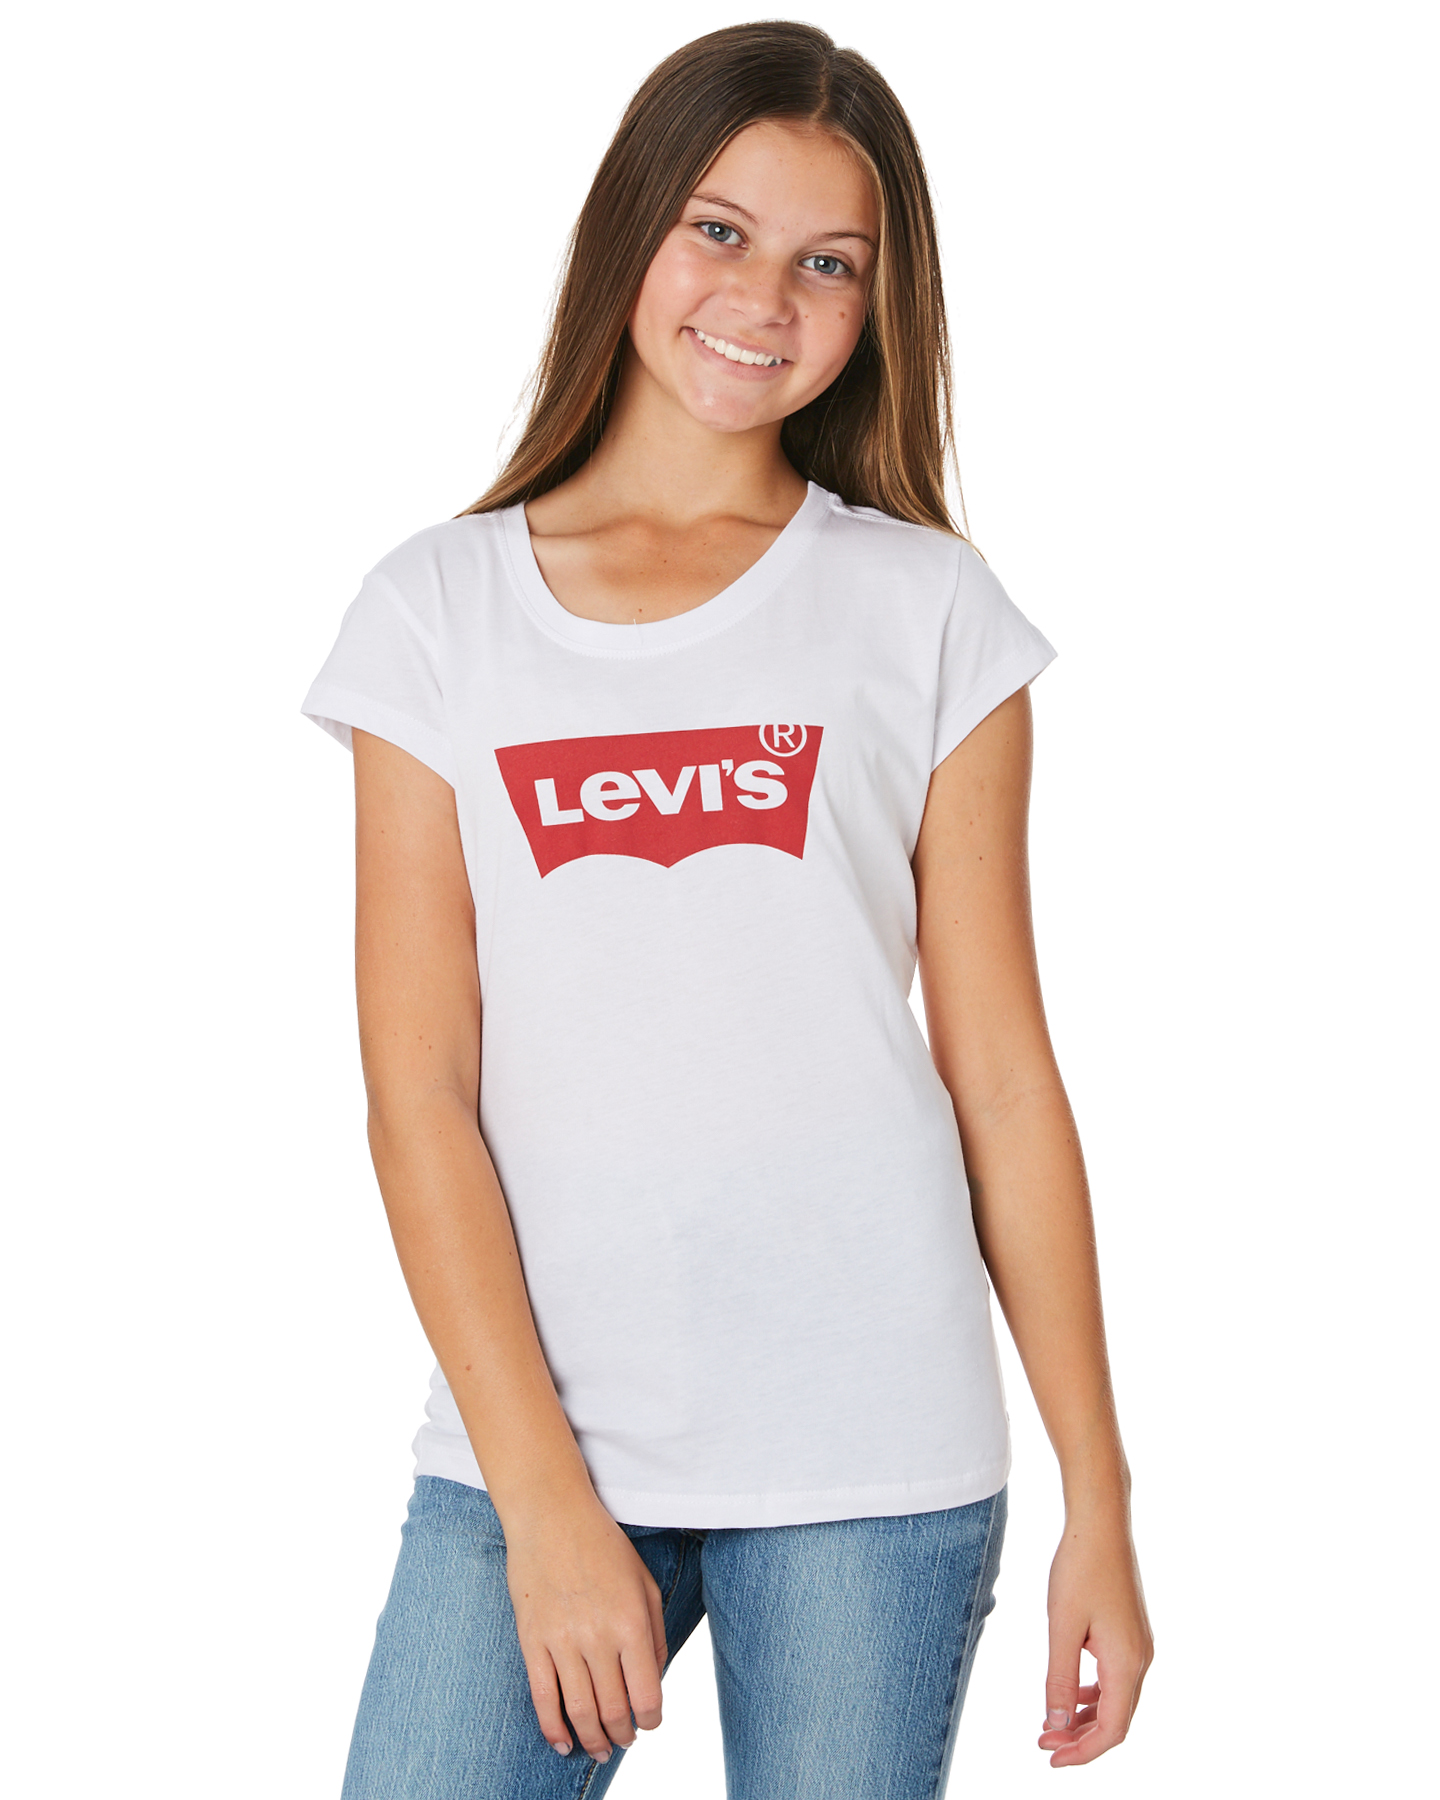 Levi's Girls Ss Batwing Tee - Teens - Red White | SurfStitch